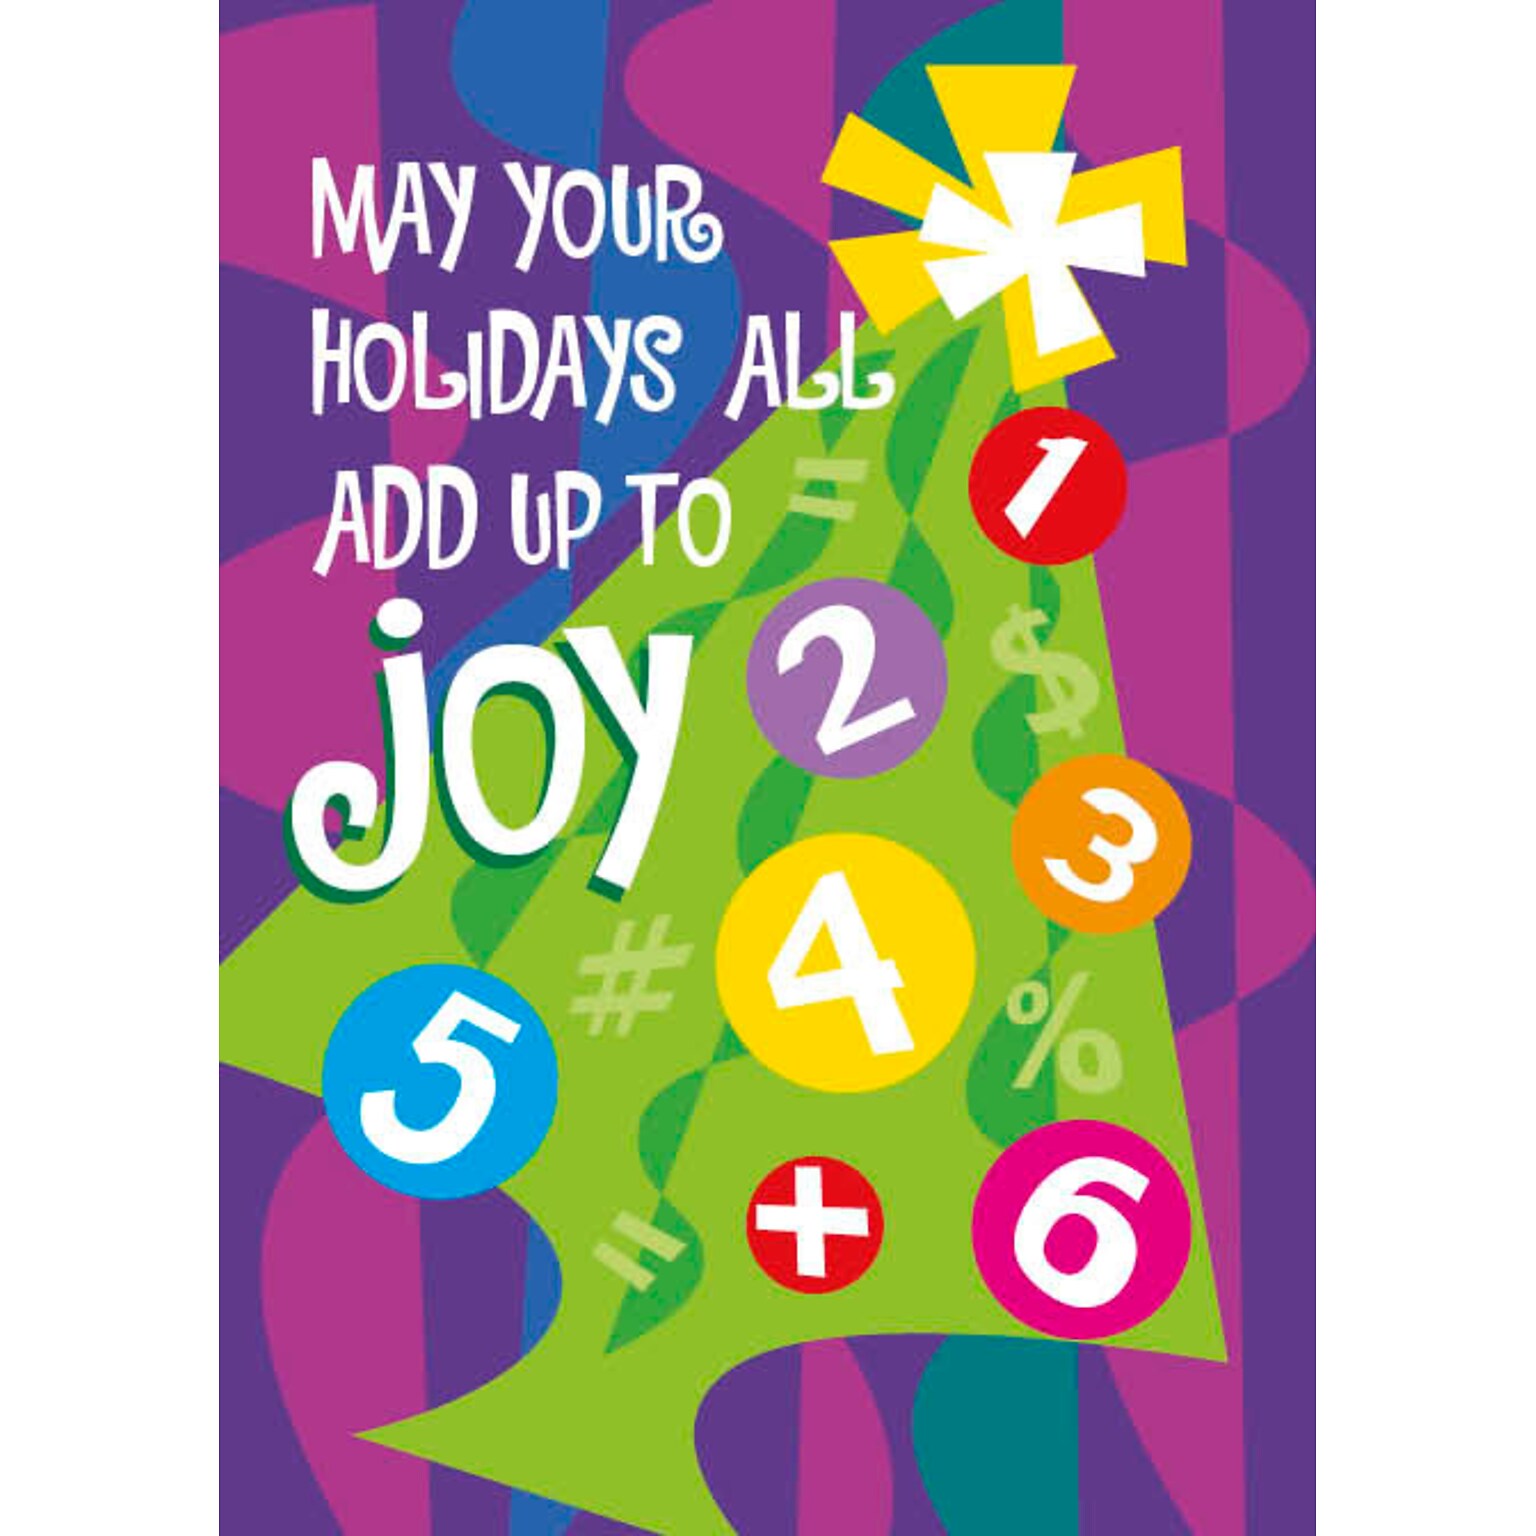 May Your Holidays All Add Up To Joy Numbers Tree Holiday Greeting Cards, With A7 Envelopes, 7 x 5, 25 Cards per Set